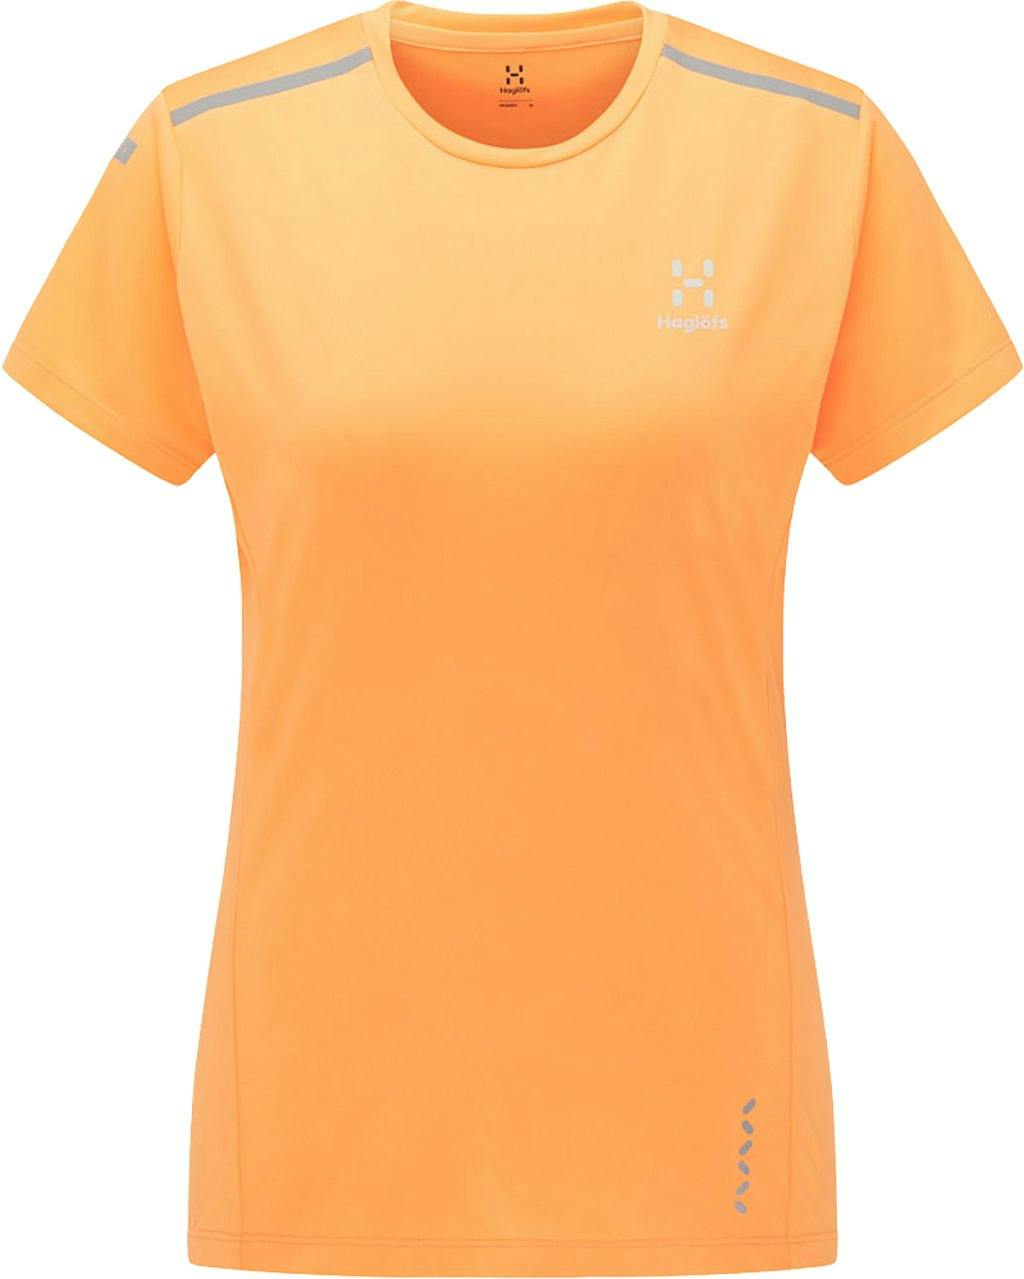 Product image for L.I.M Tech Tee - Women's